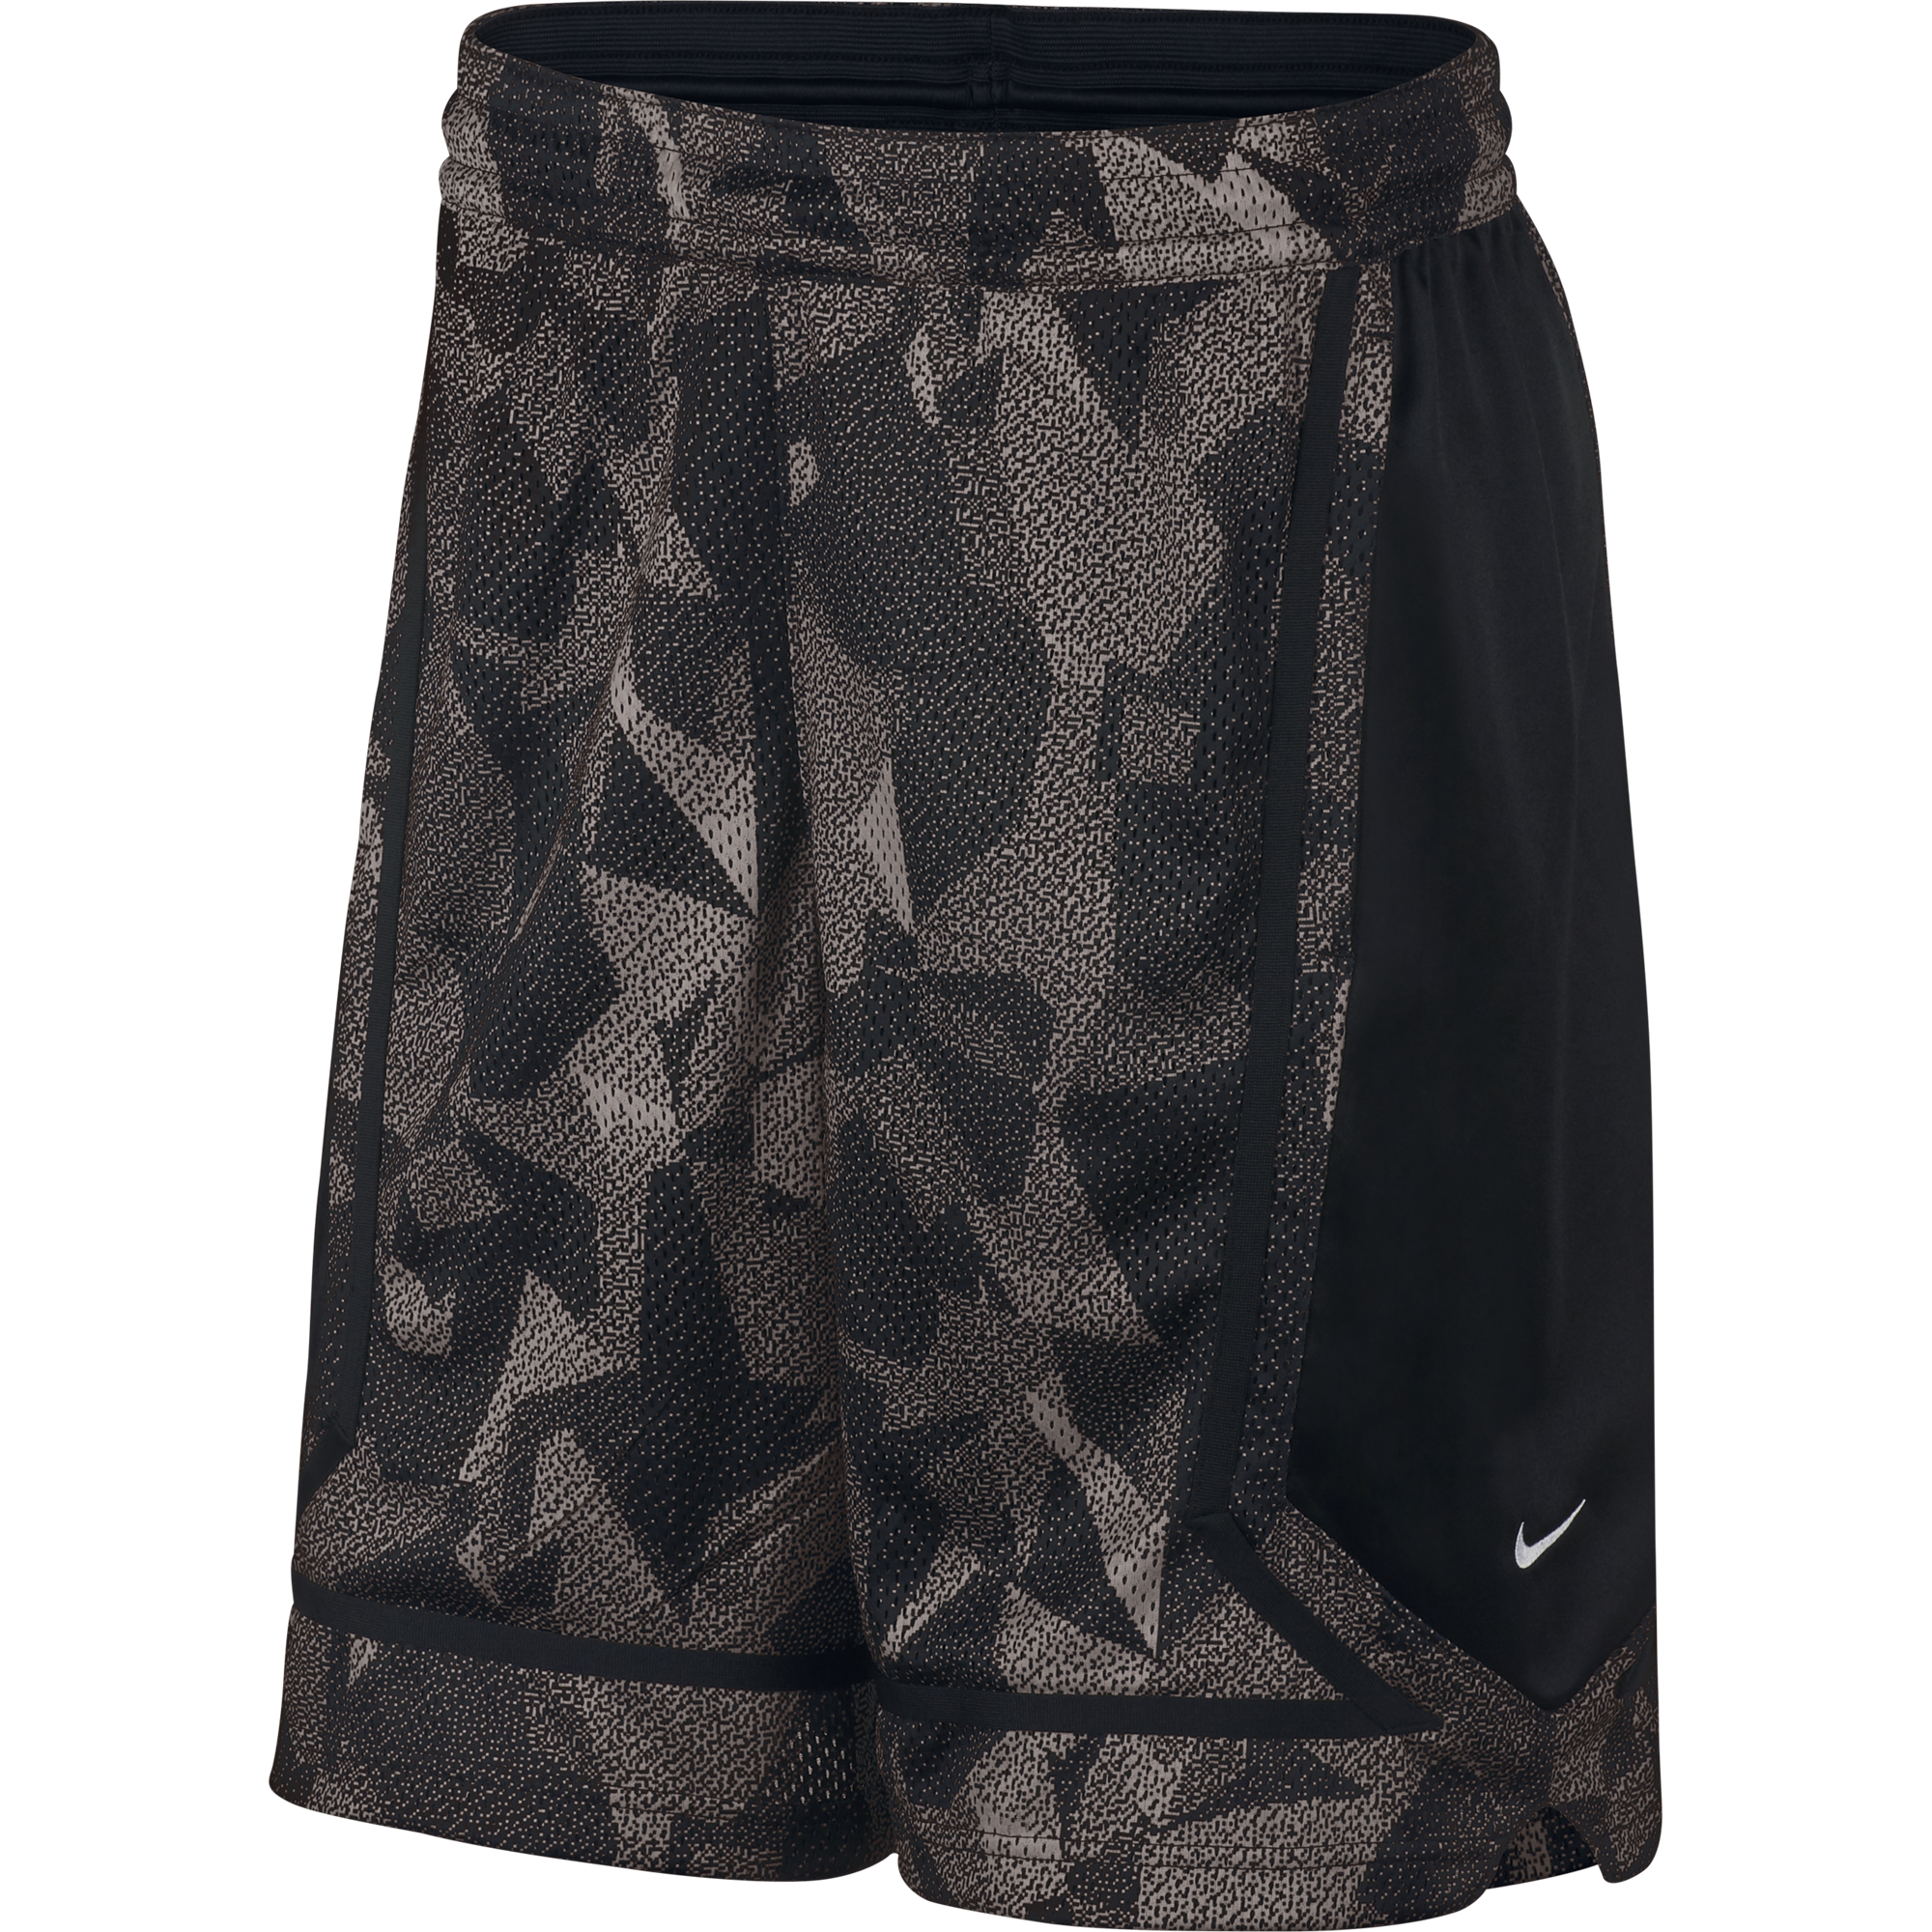 NIKE KYRIE DRY ELITE SHORTS for £45.00 